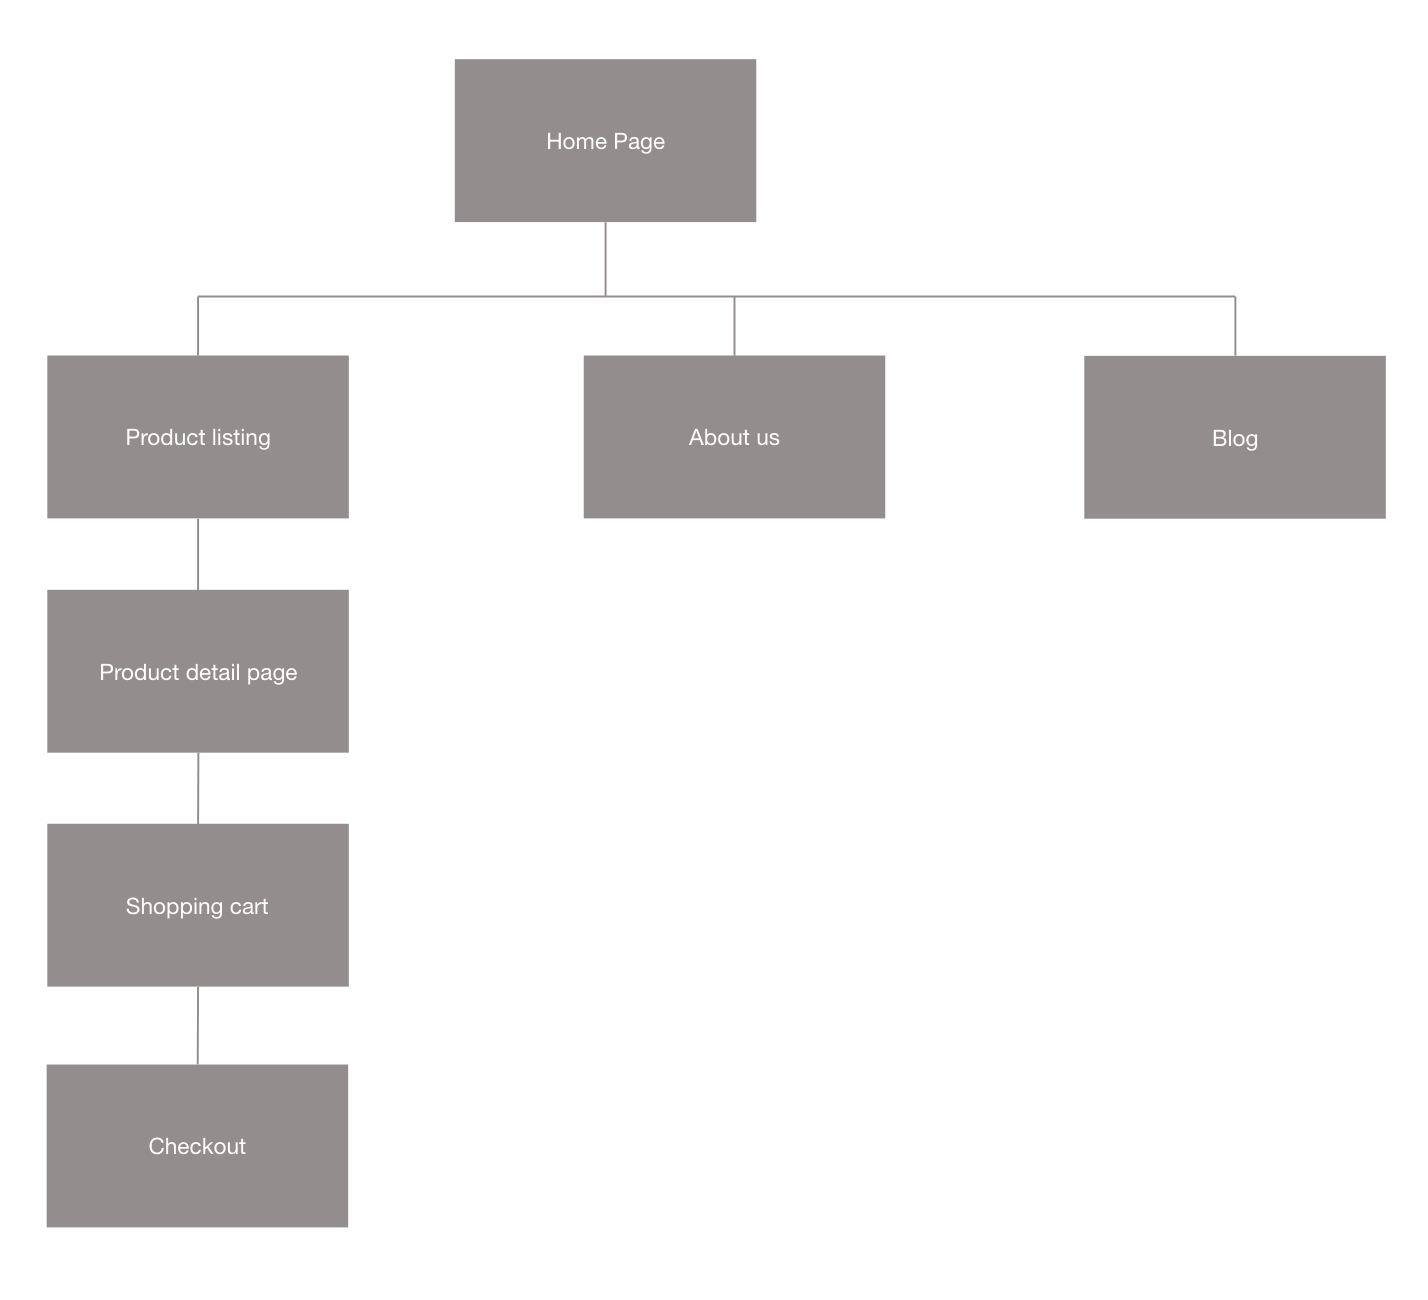 A sitemap of an ecommerce website clearly indicates paths between pages. 